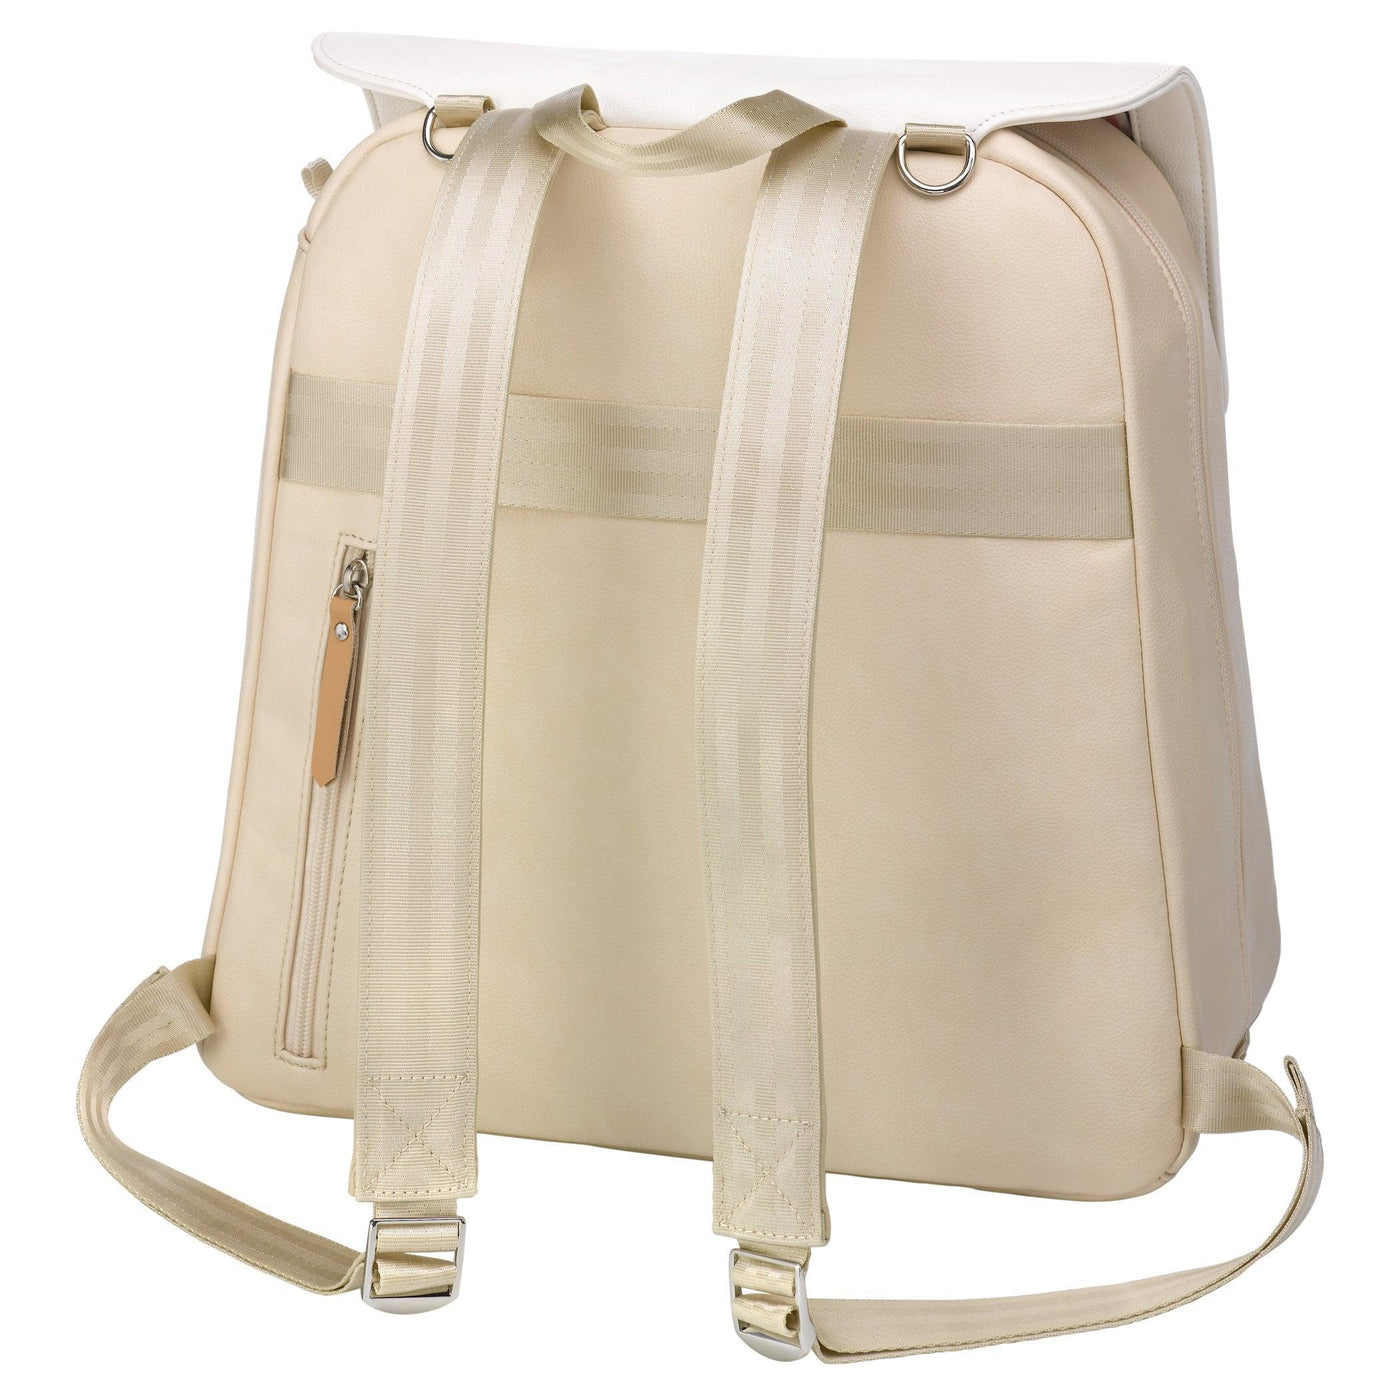 Meta Backpack in Toasted Marshmallow-Diaper Bags-Petunia Pickle Bottom